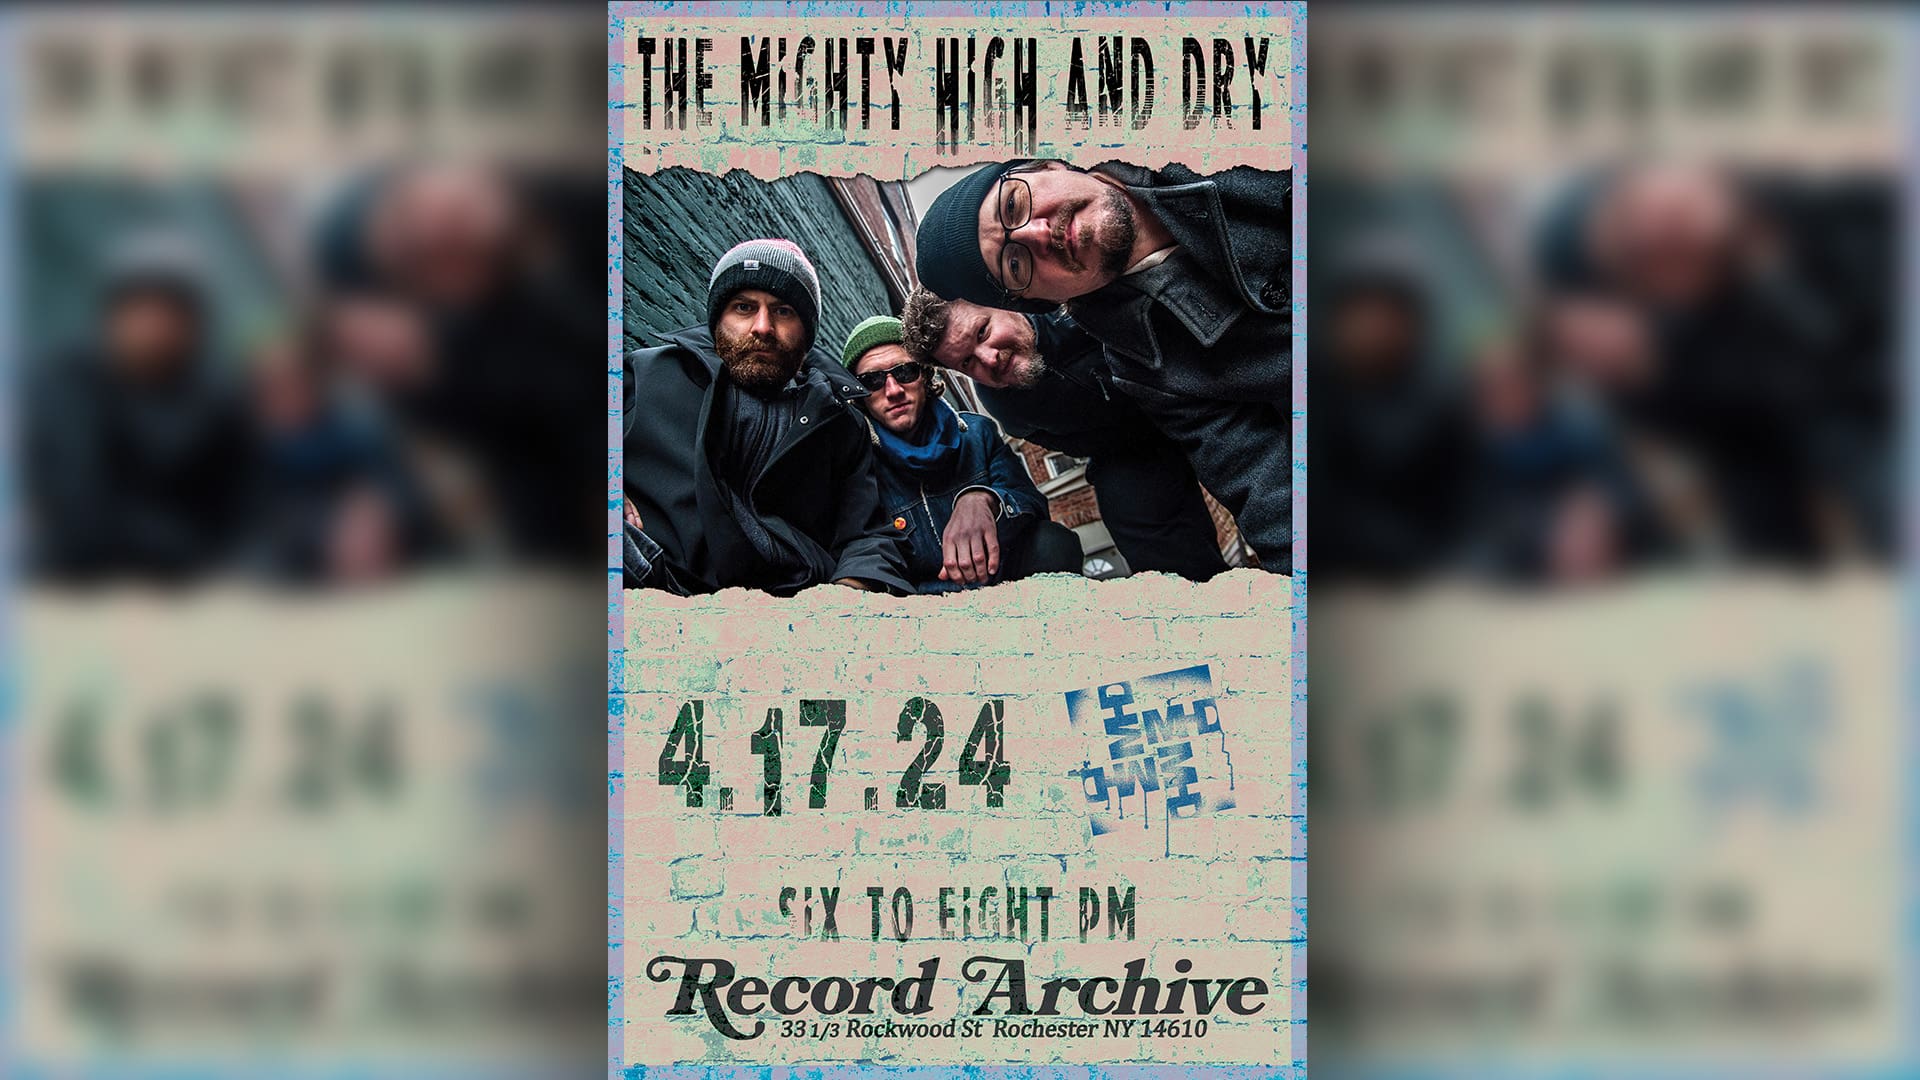 The Mighty High and Dry. 4.17.24 Six to Eight PM. Record Archive 33 1/3 Rockwood St Rochester NY 14610.